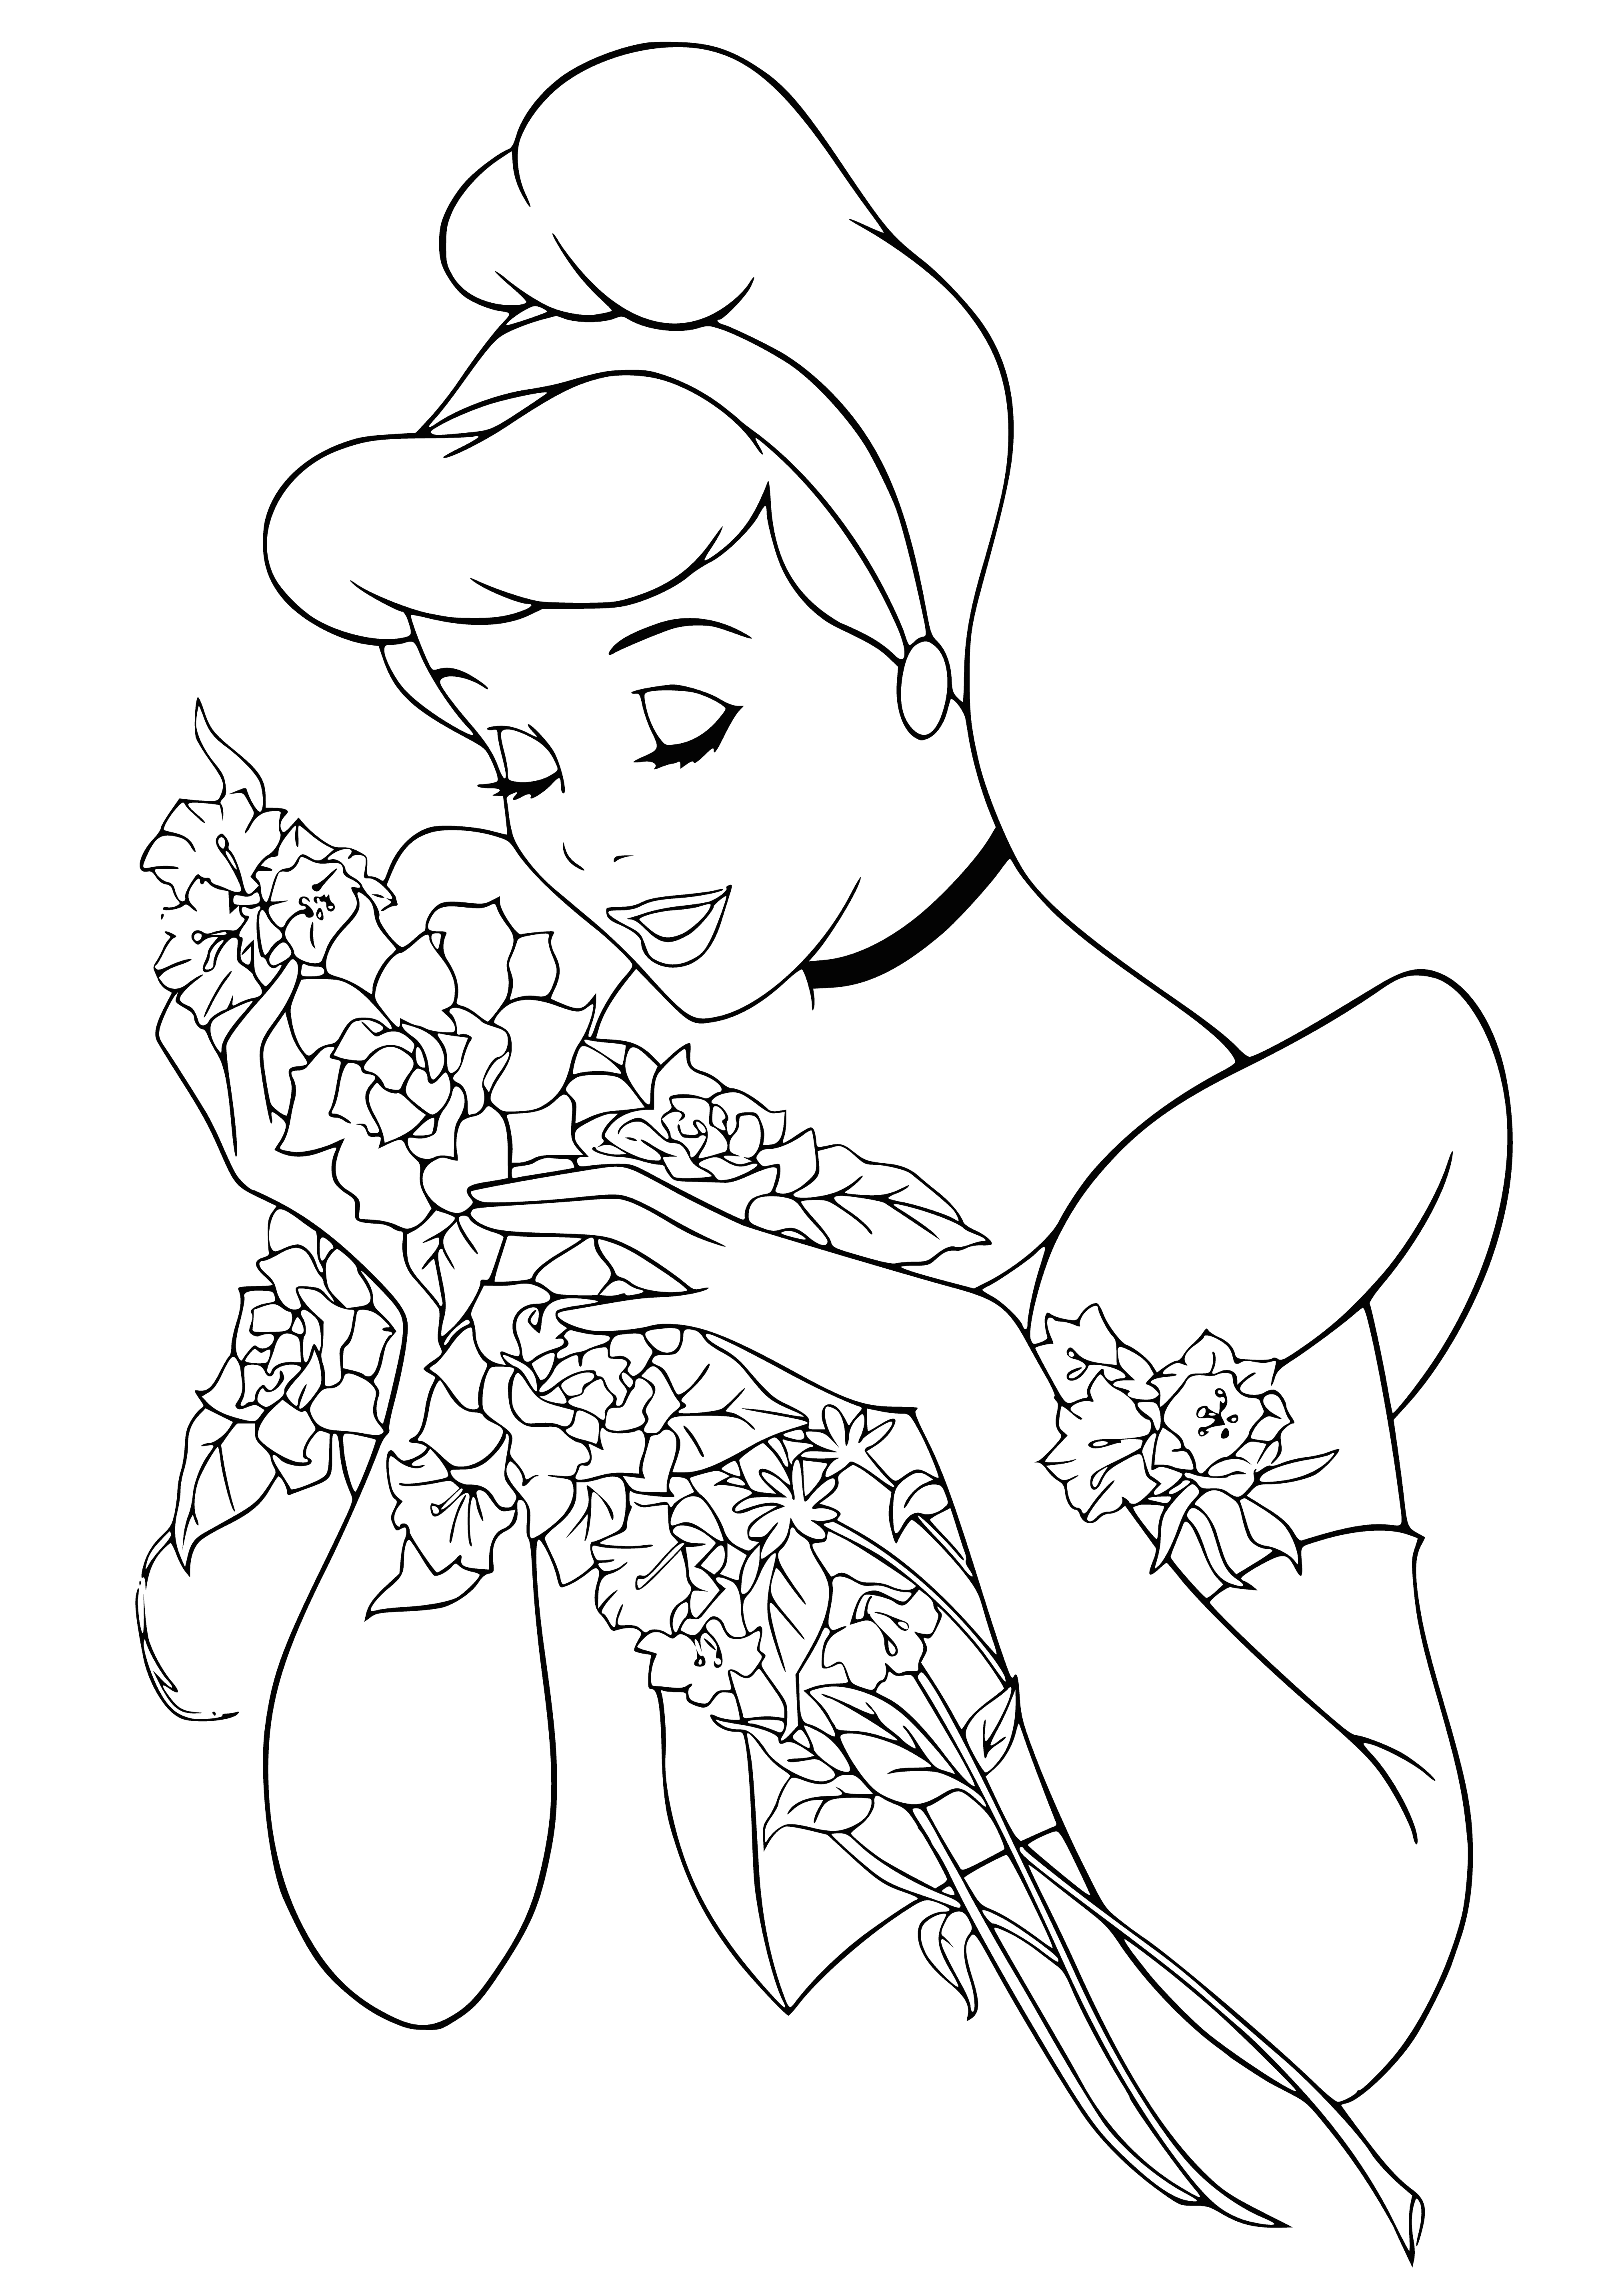 Cinderella with flowers coloring page